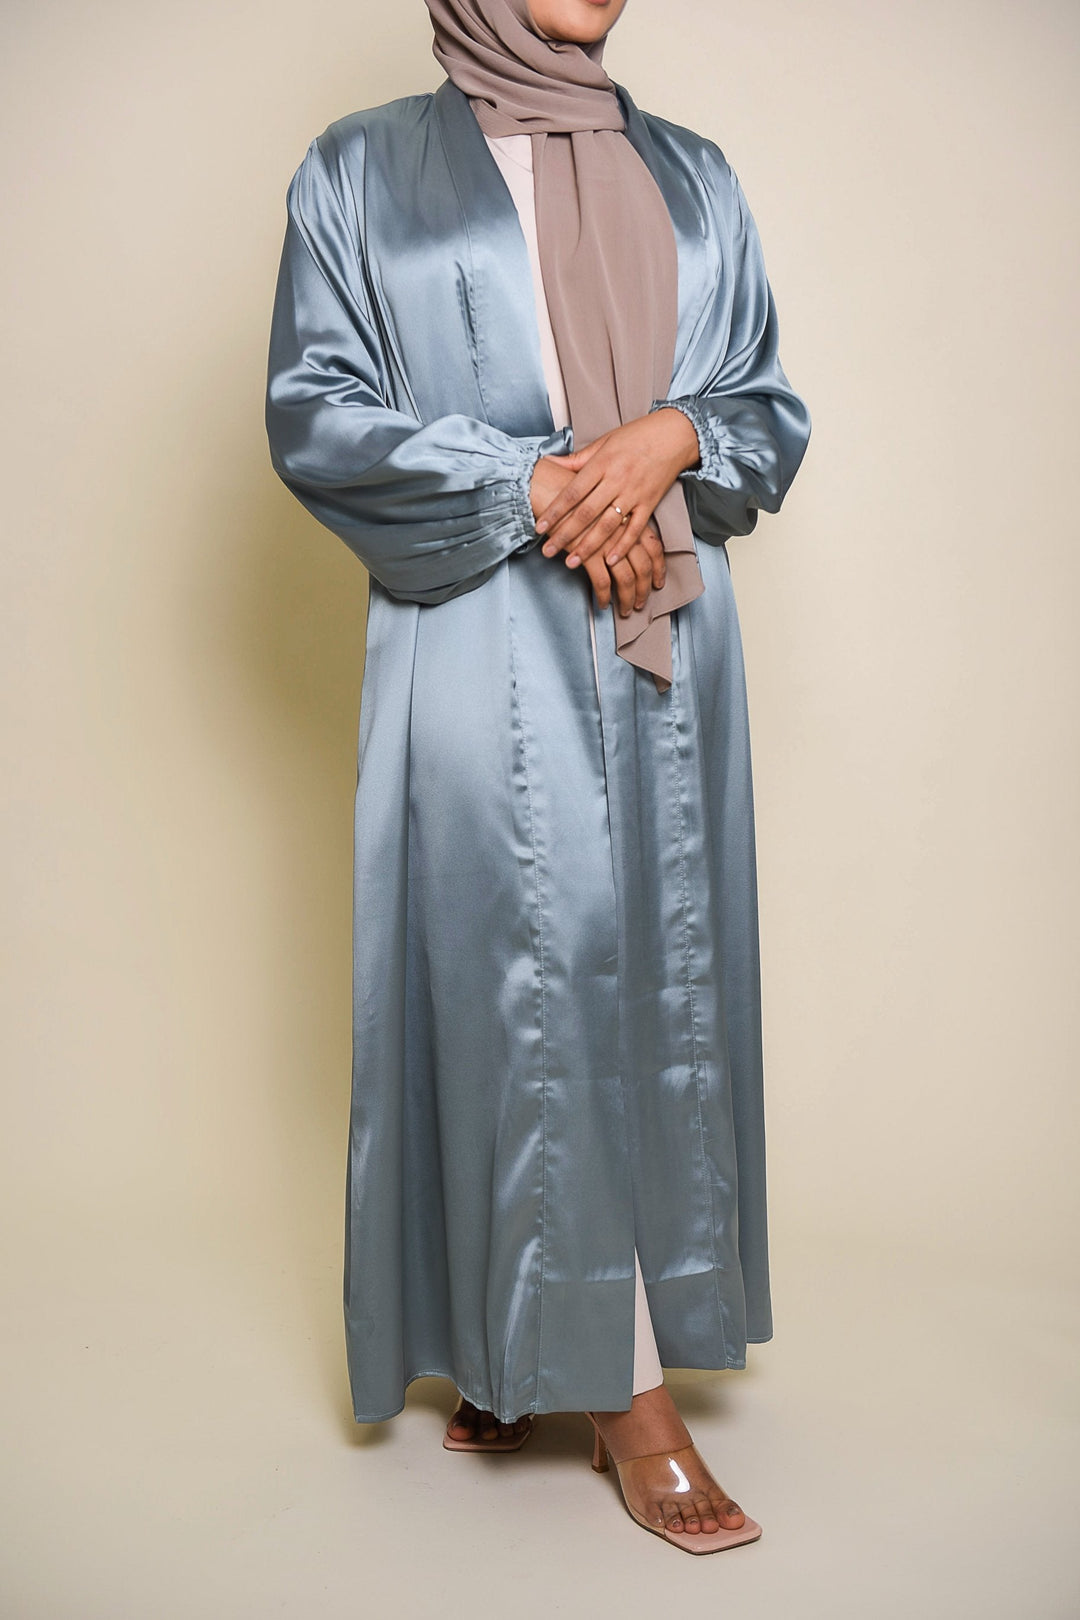 Get trendy with Julissa Satin Duster - Light Blue - Dresses available at Voilee NY. Grab yours for $34.99 today!